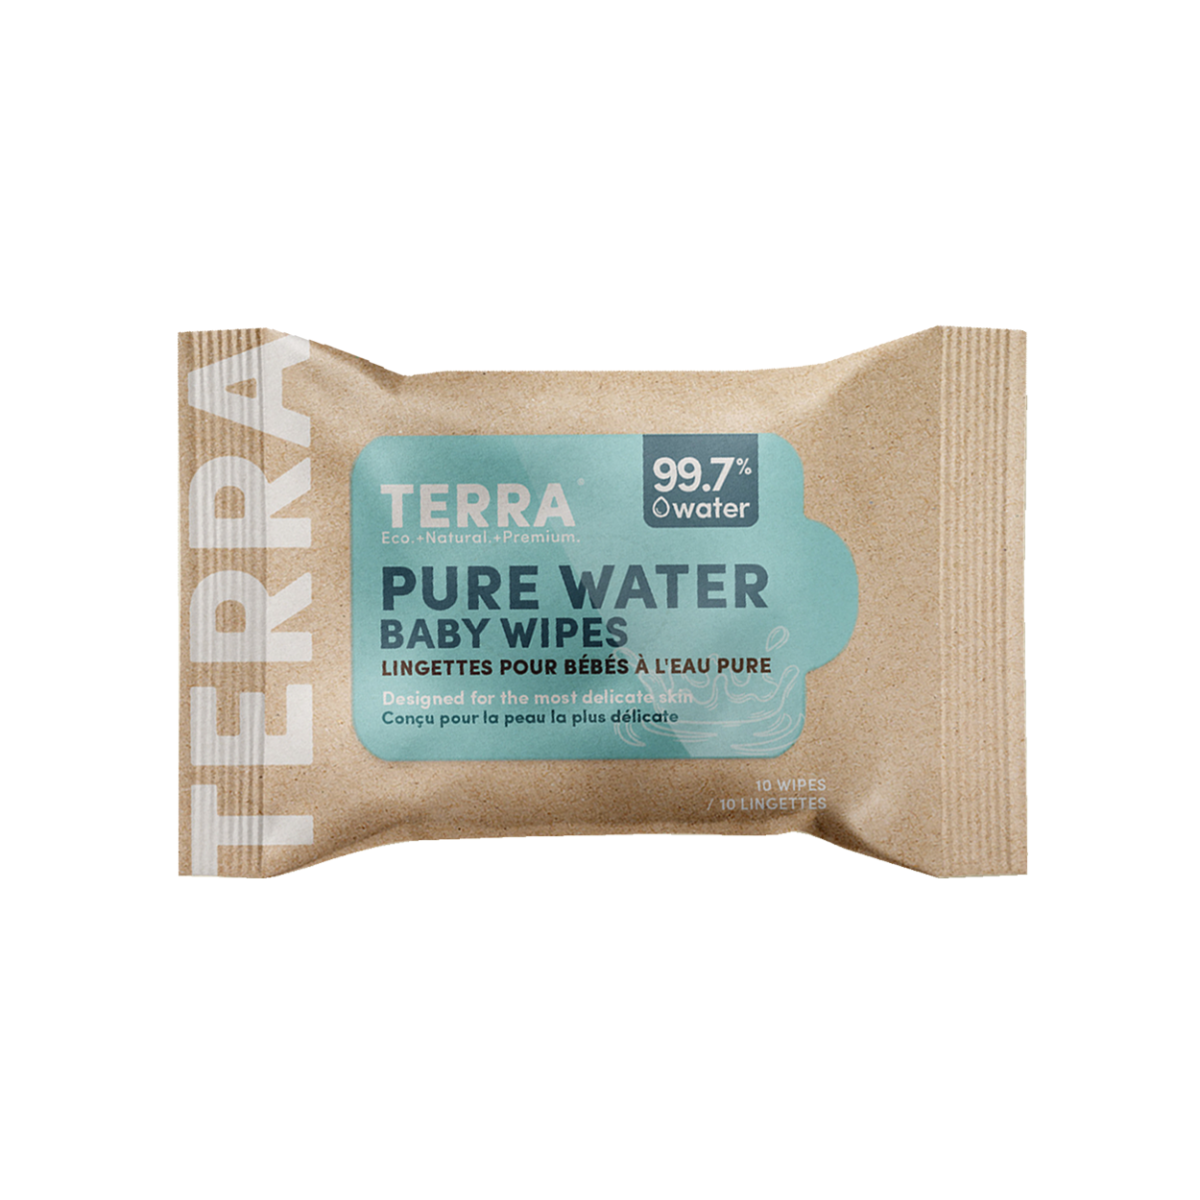  Terra Bamboo Baby Wipes: Pure Water Wipes, 99.7% Pure New  Zealand Water, 100% Biodegradable Bamboo Fiber, 0% Plastic, Unscented Baby  Wipes for Sensitive Skin, 1 Pack of 70 Wipes : Everything Else